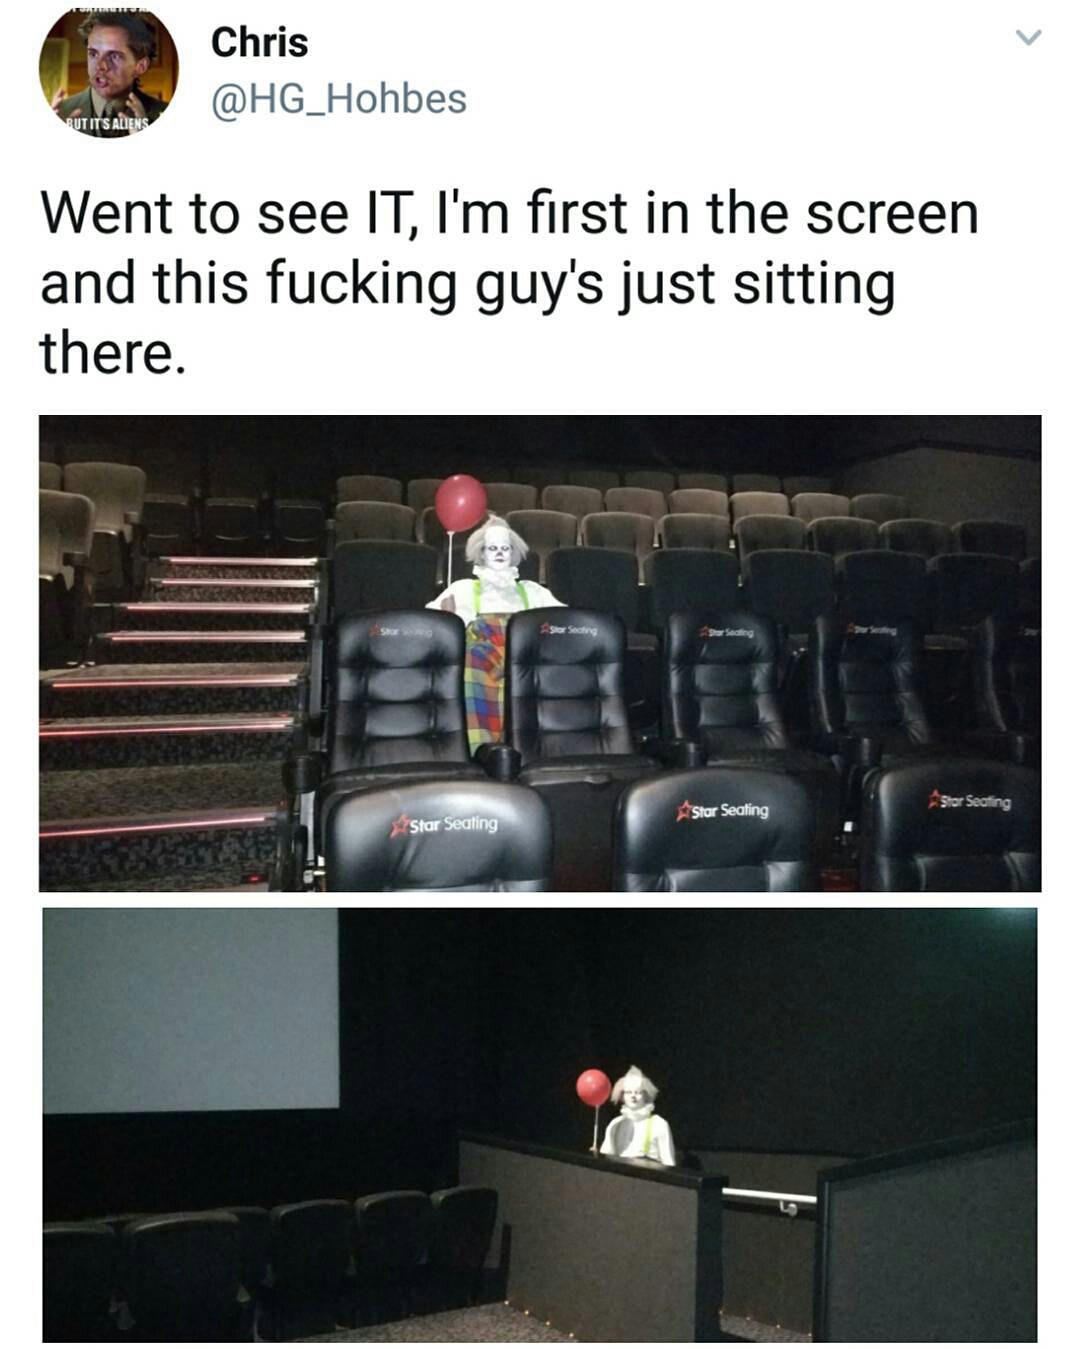 funny meme of lone clown sitting at the movie theatre with red balloon for the movie IT.